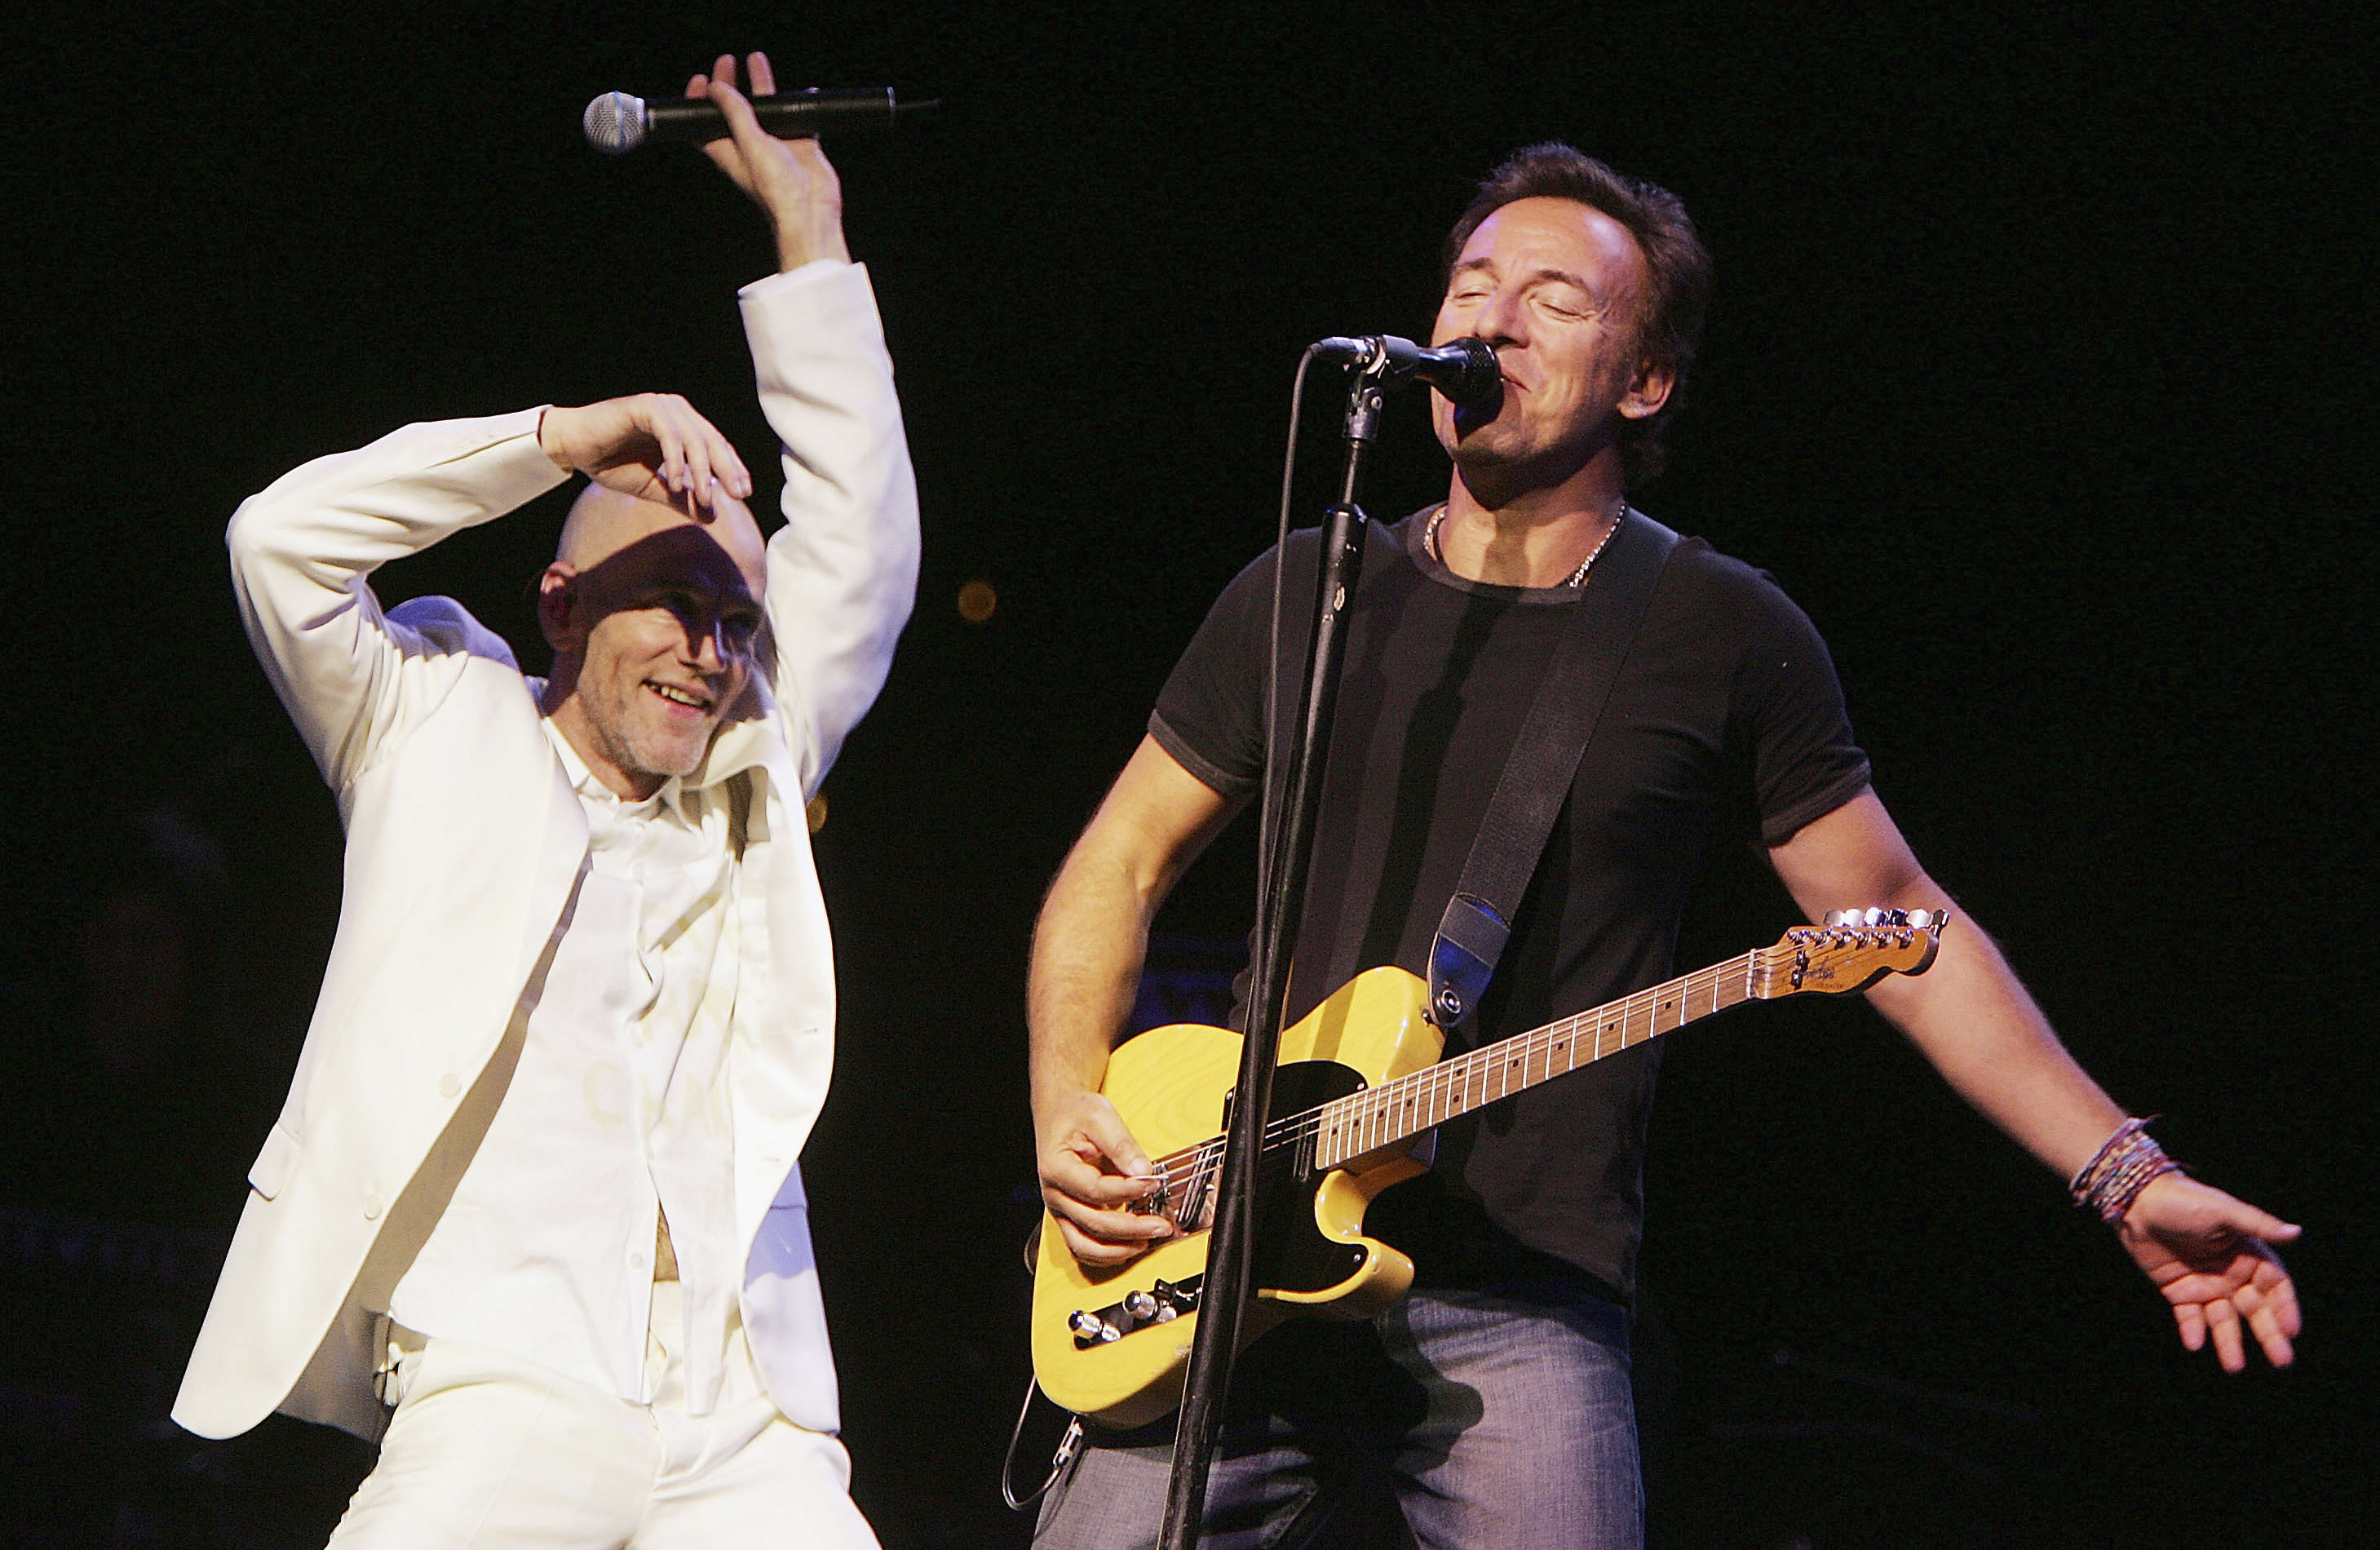 Michael Stipe of REM and Bruce Springsteen performing at the “Vote For Change” concert at the Wachovia Center, Philadelphia, October 1, 2004